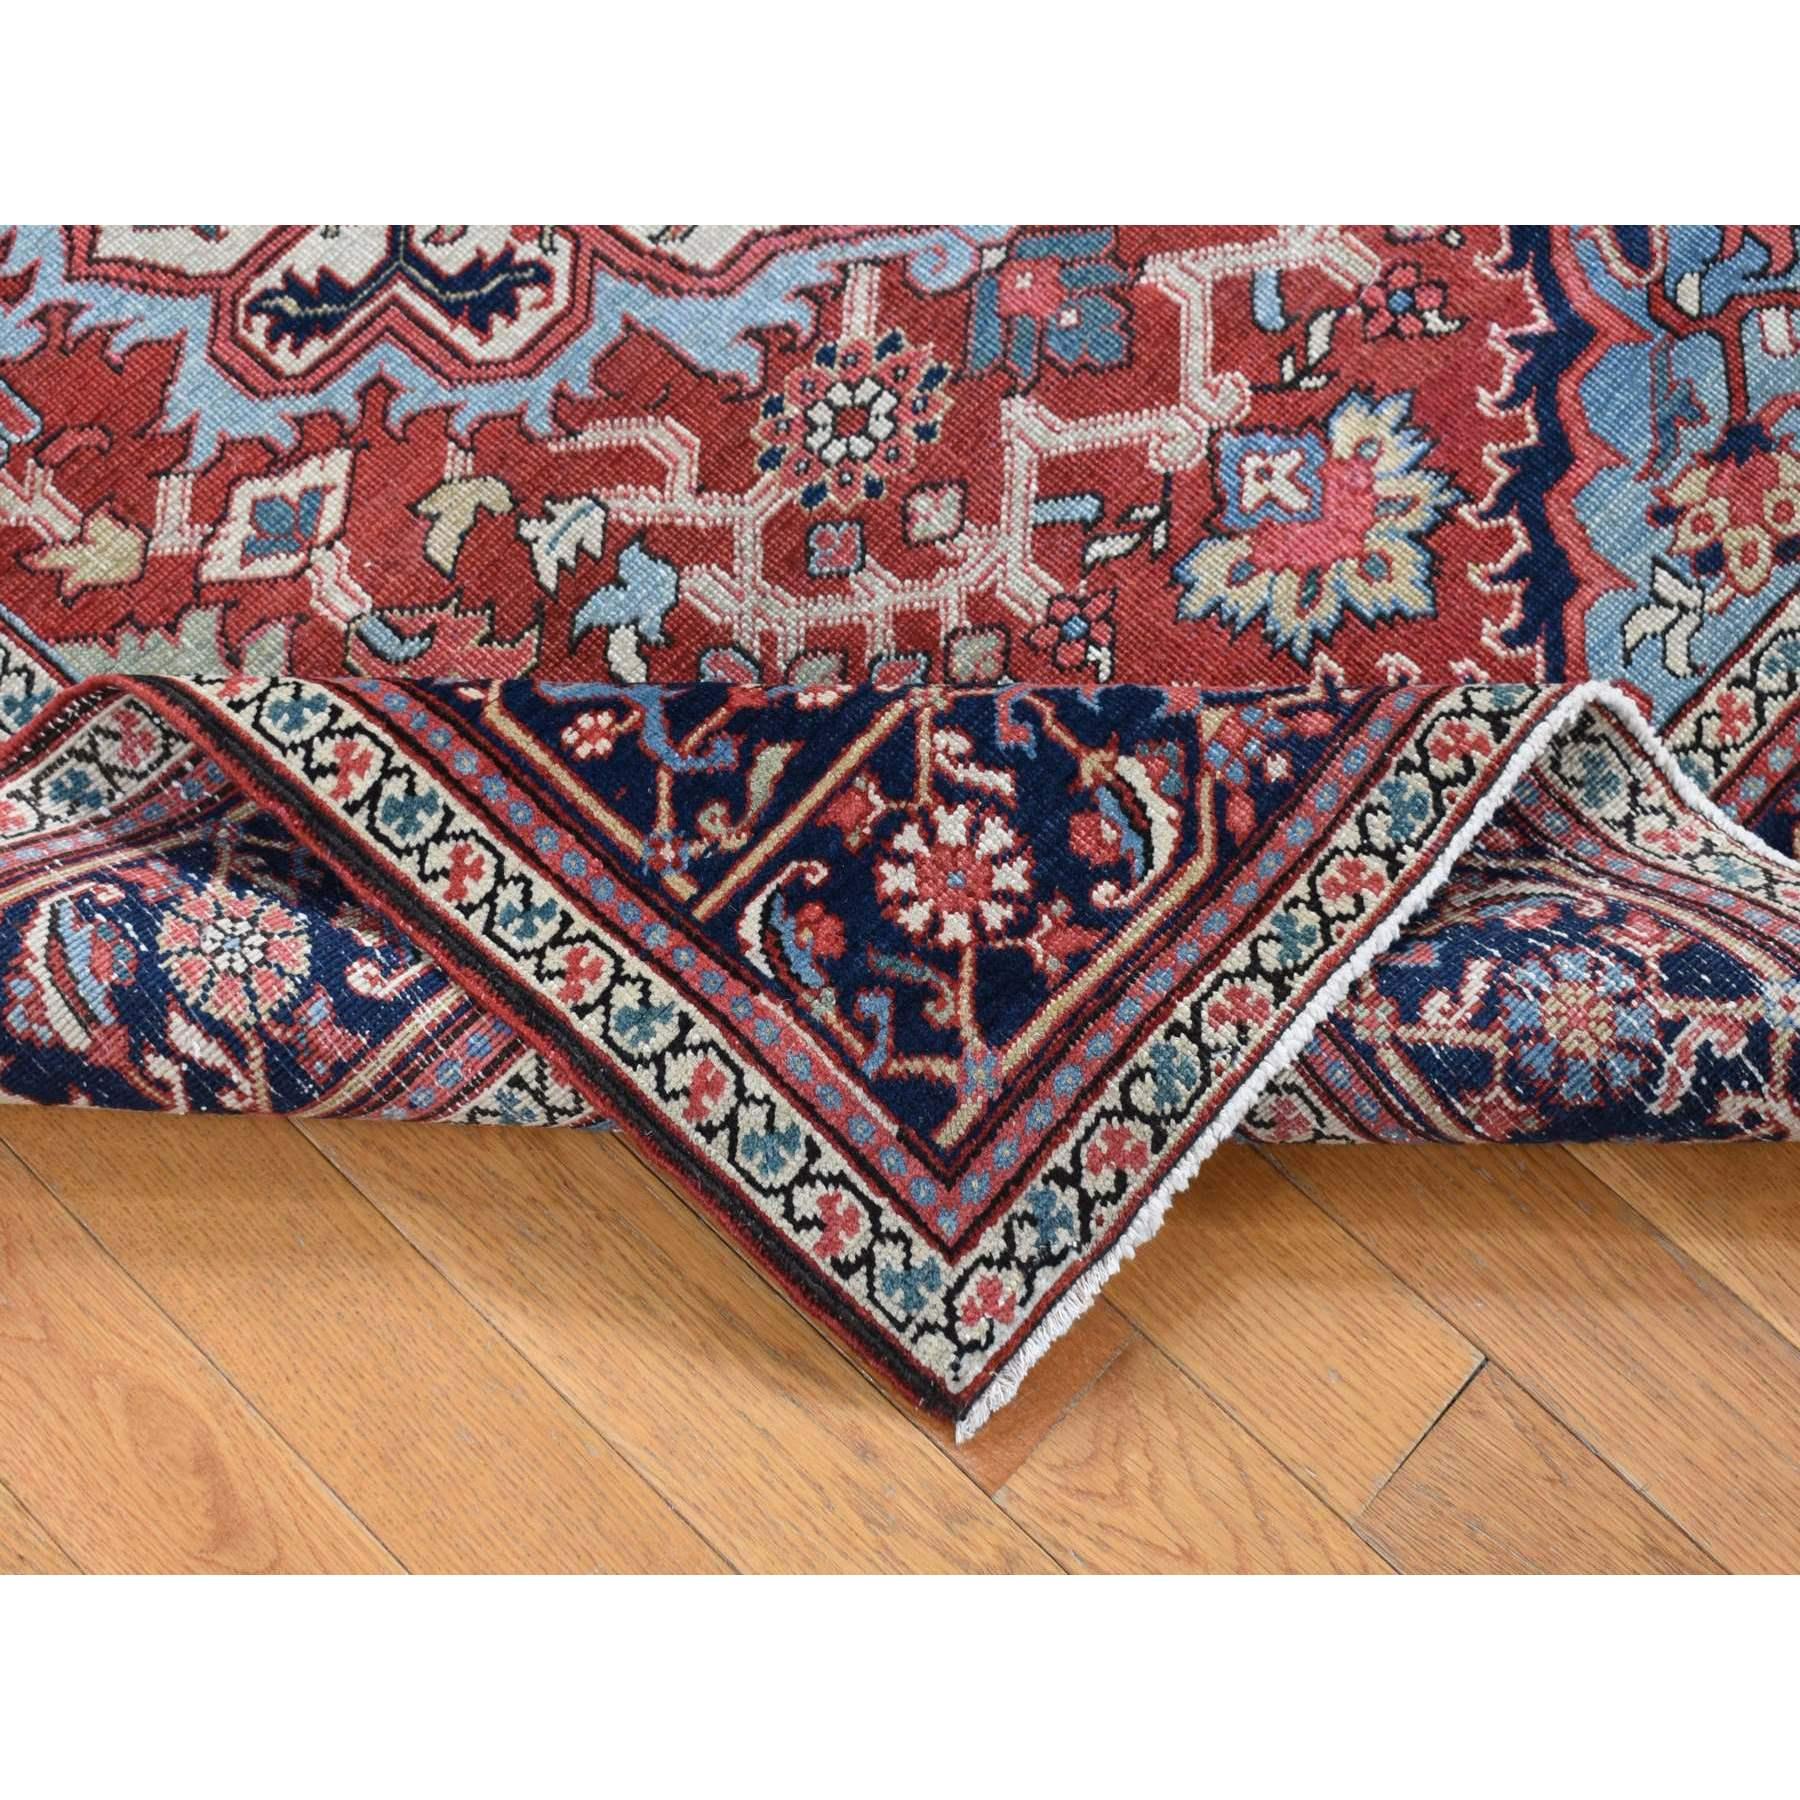 Medieval Crimson Red Antique Persian Serapi Heriz Clean Even Wear Hand Knotted Wool Rug For Sale